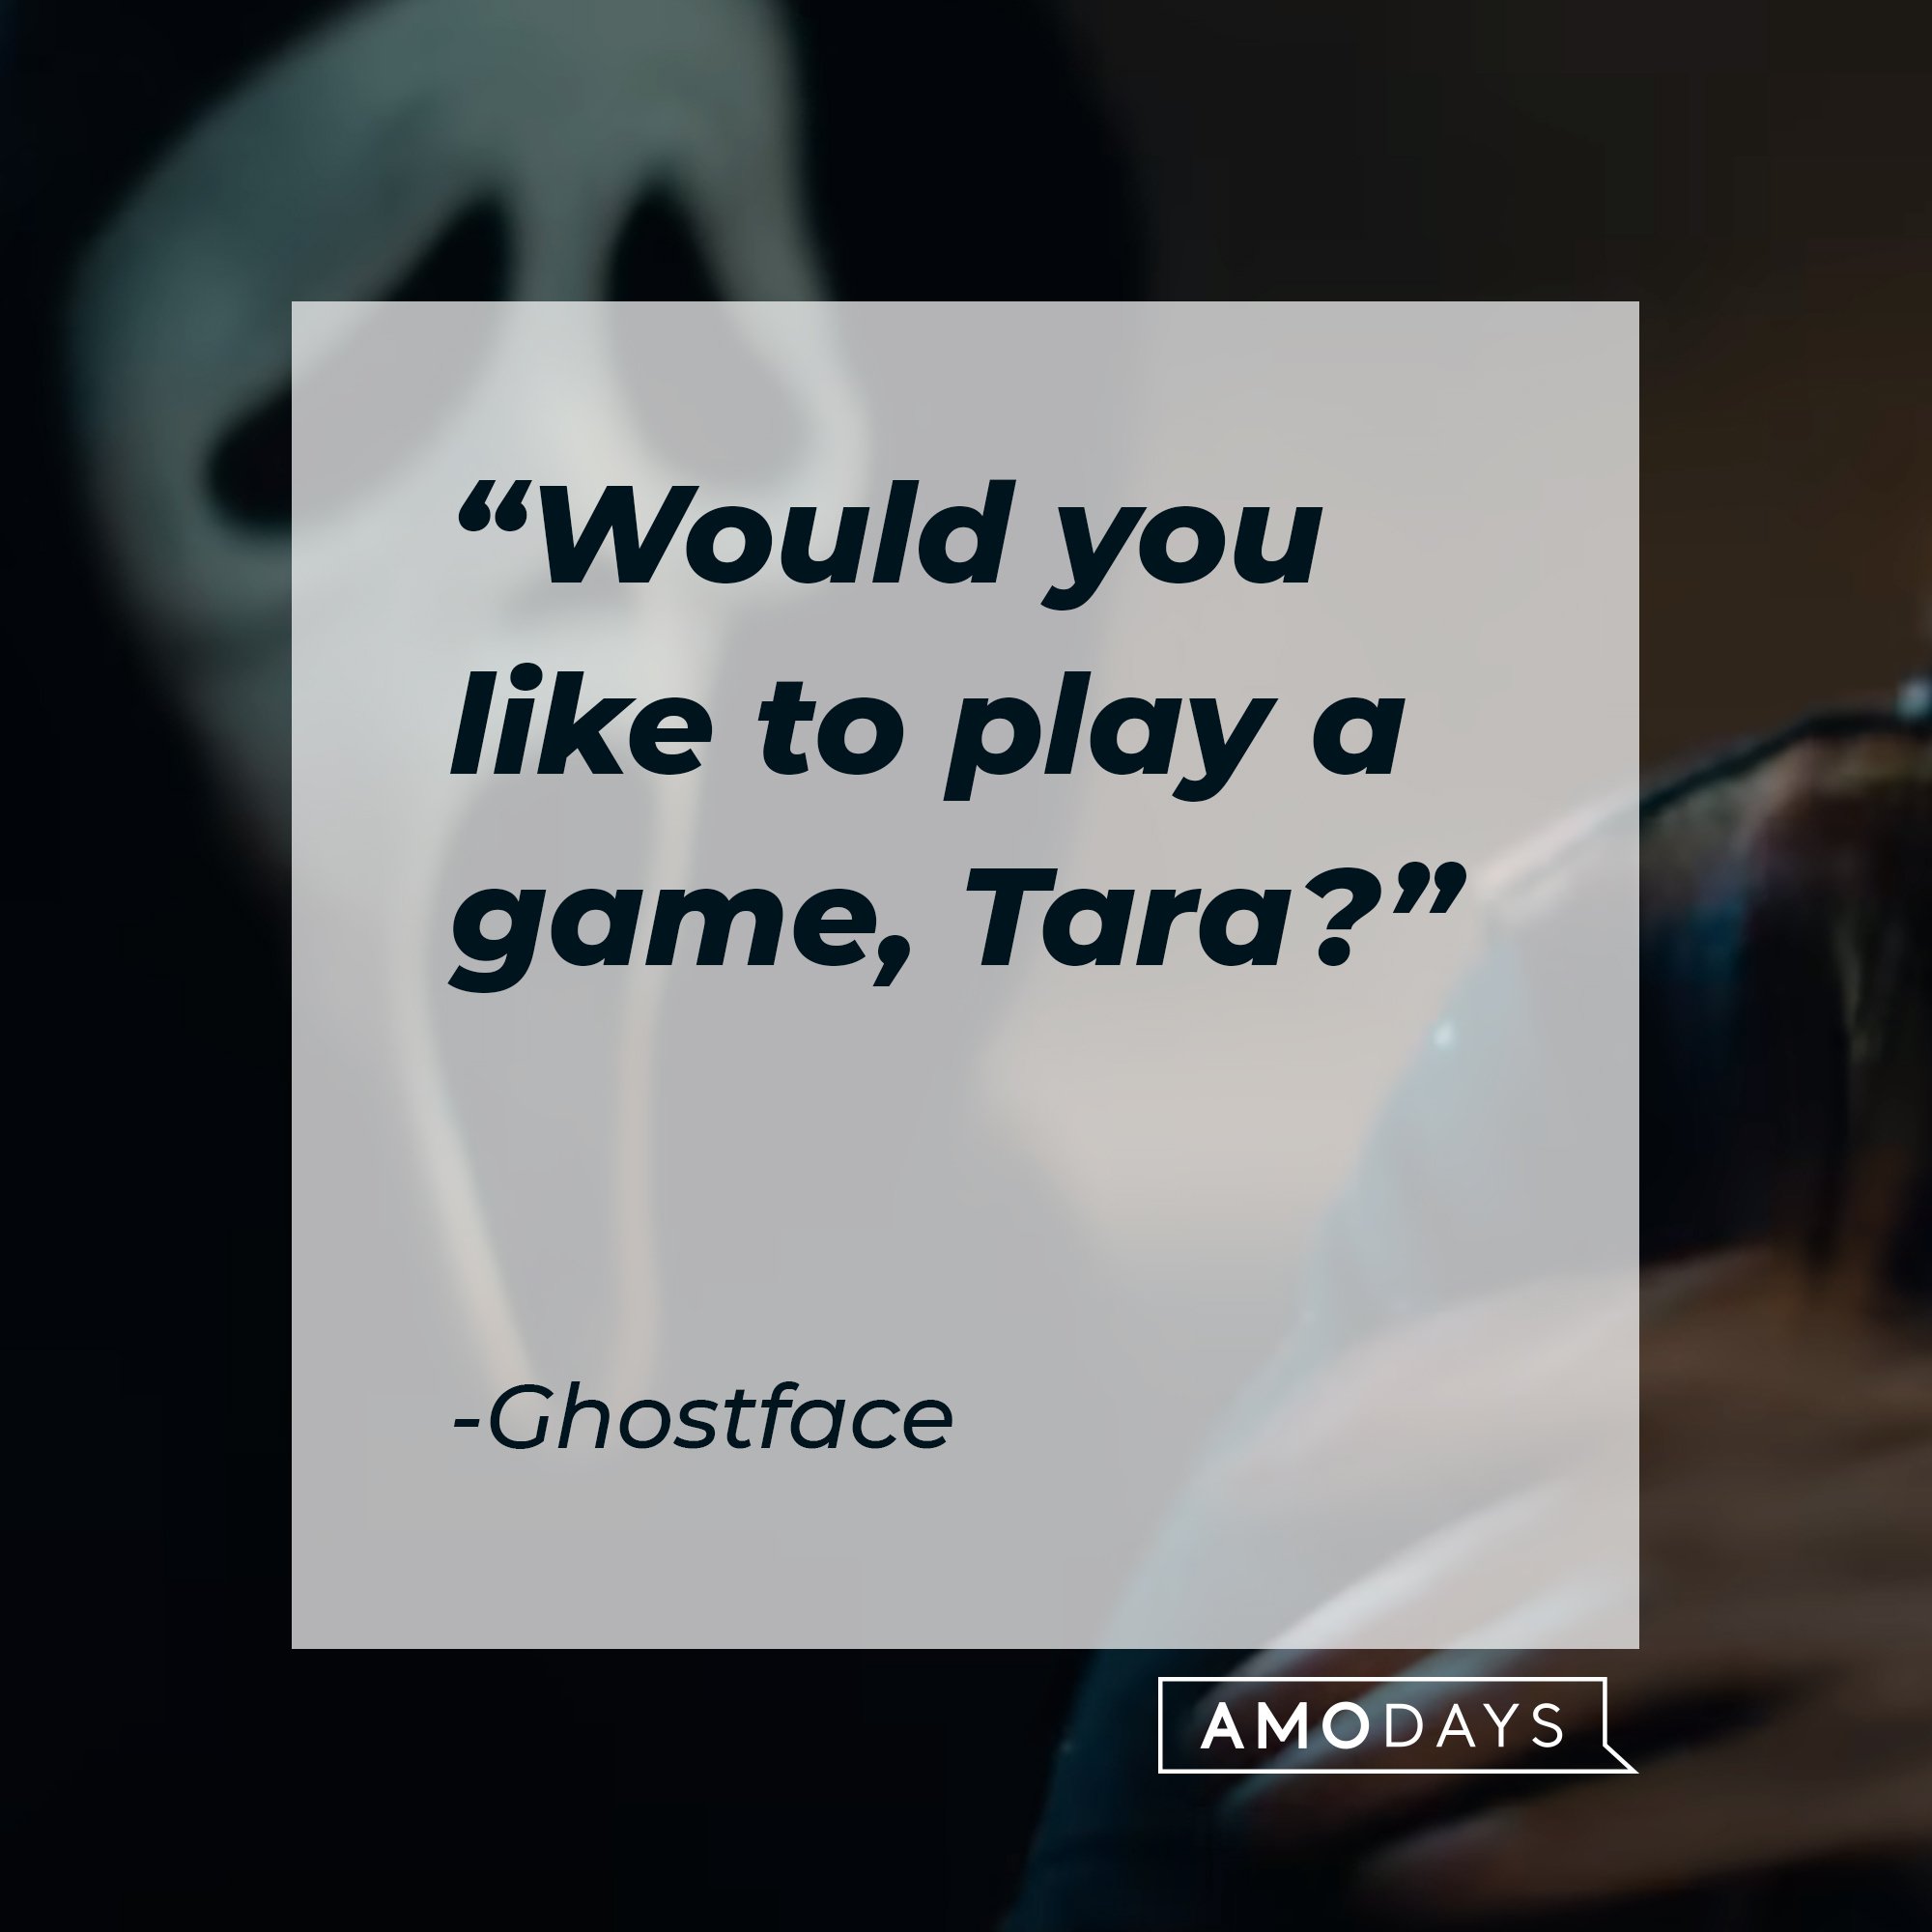 Ghostface's quote: "Would you like to play a game, Tara?" | Image: AmoDays